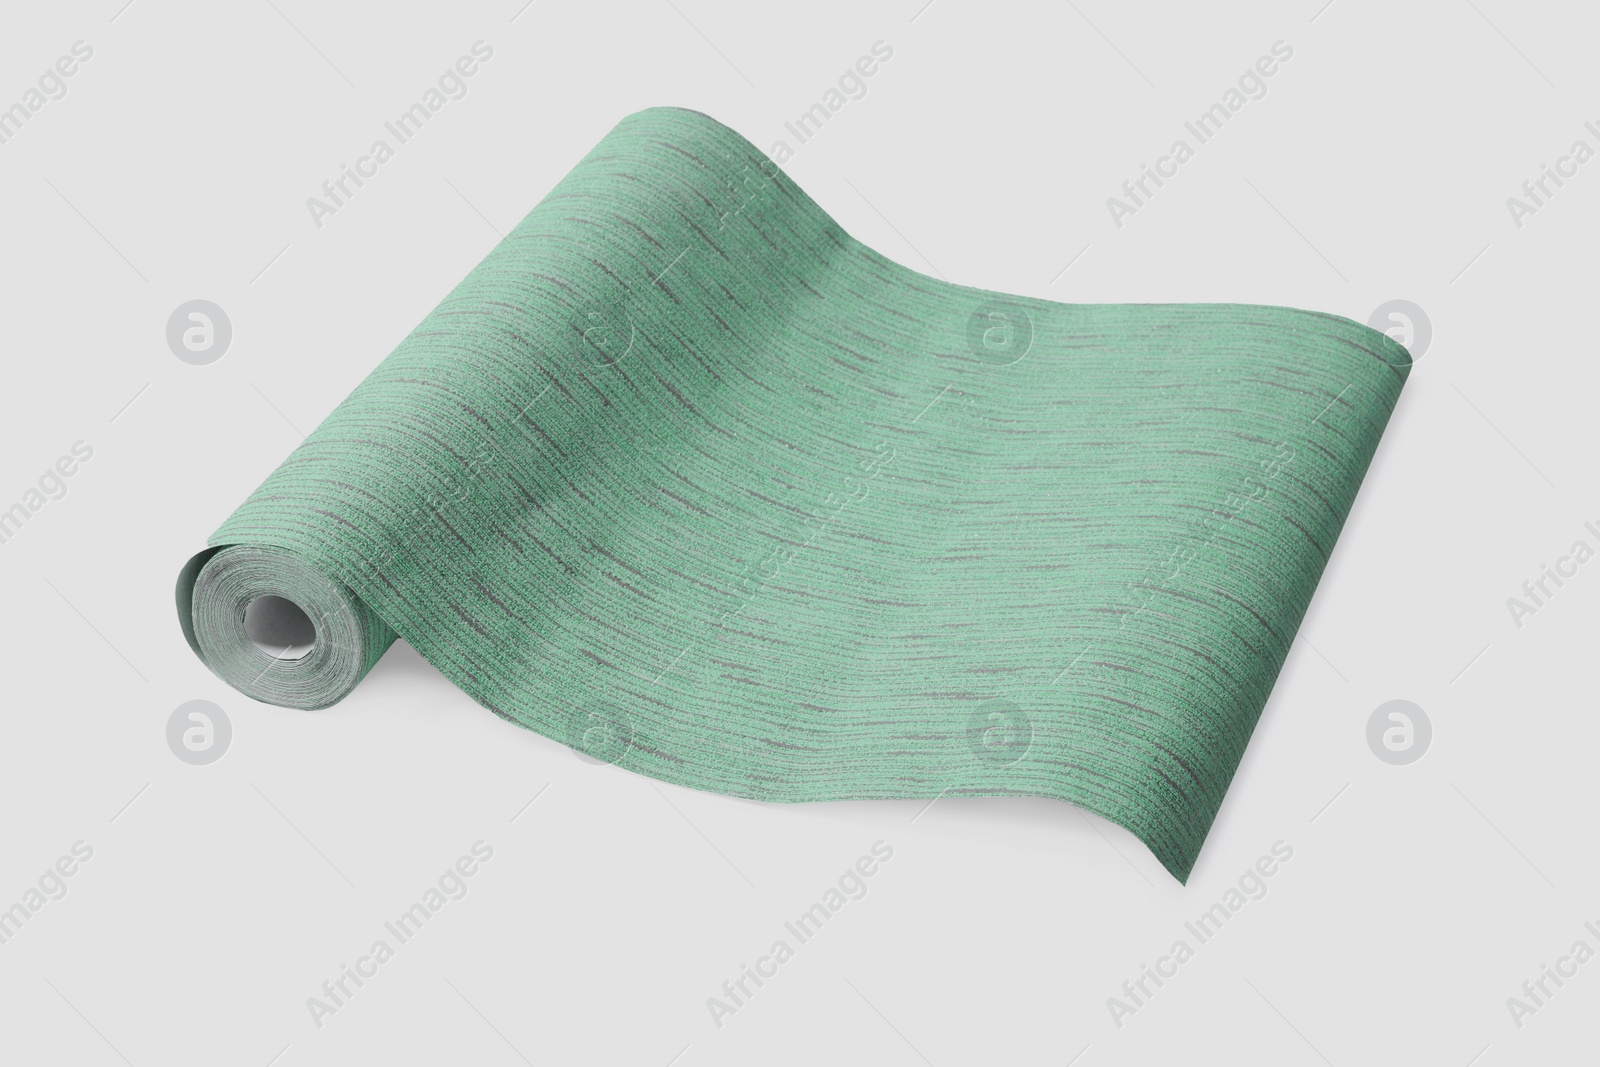 Image of One green wallpaper roll isolated on white